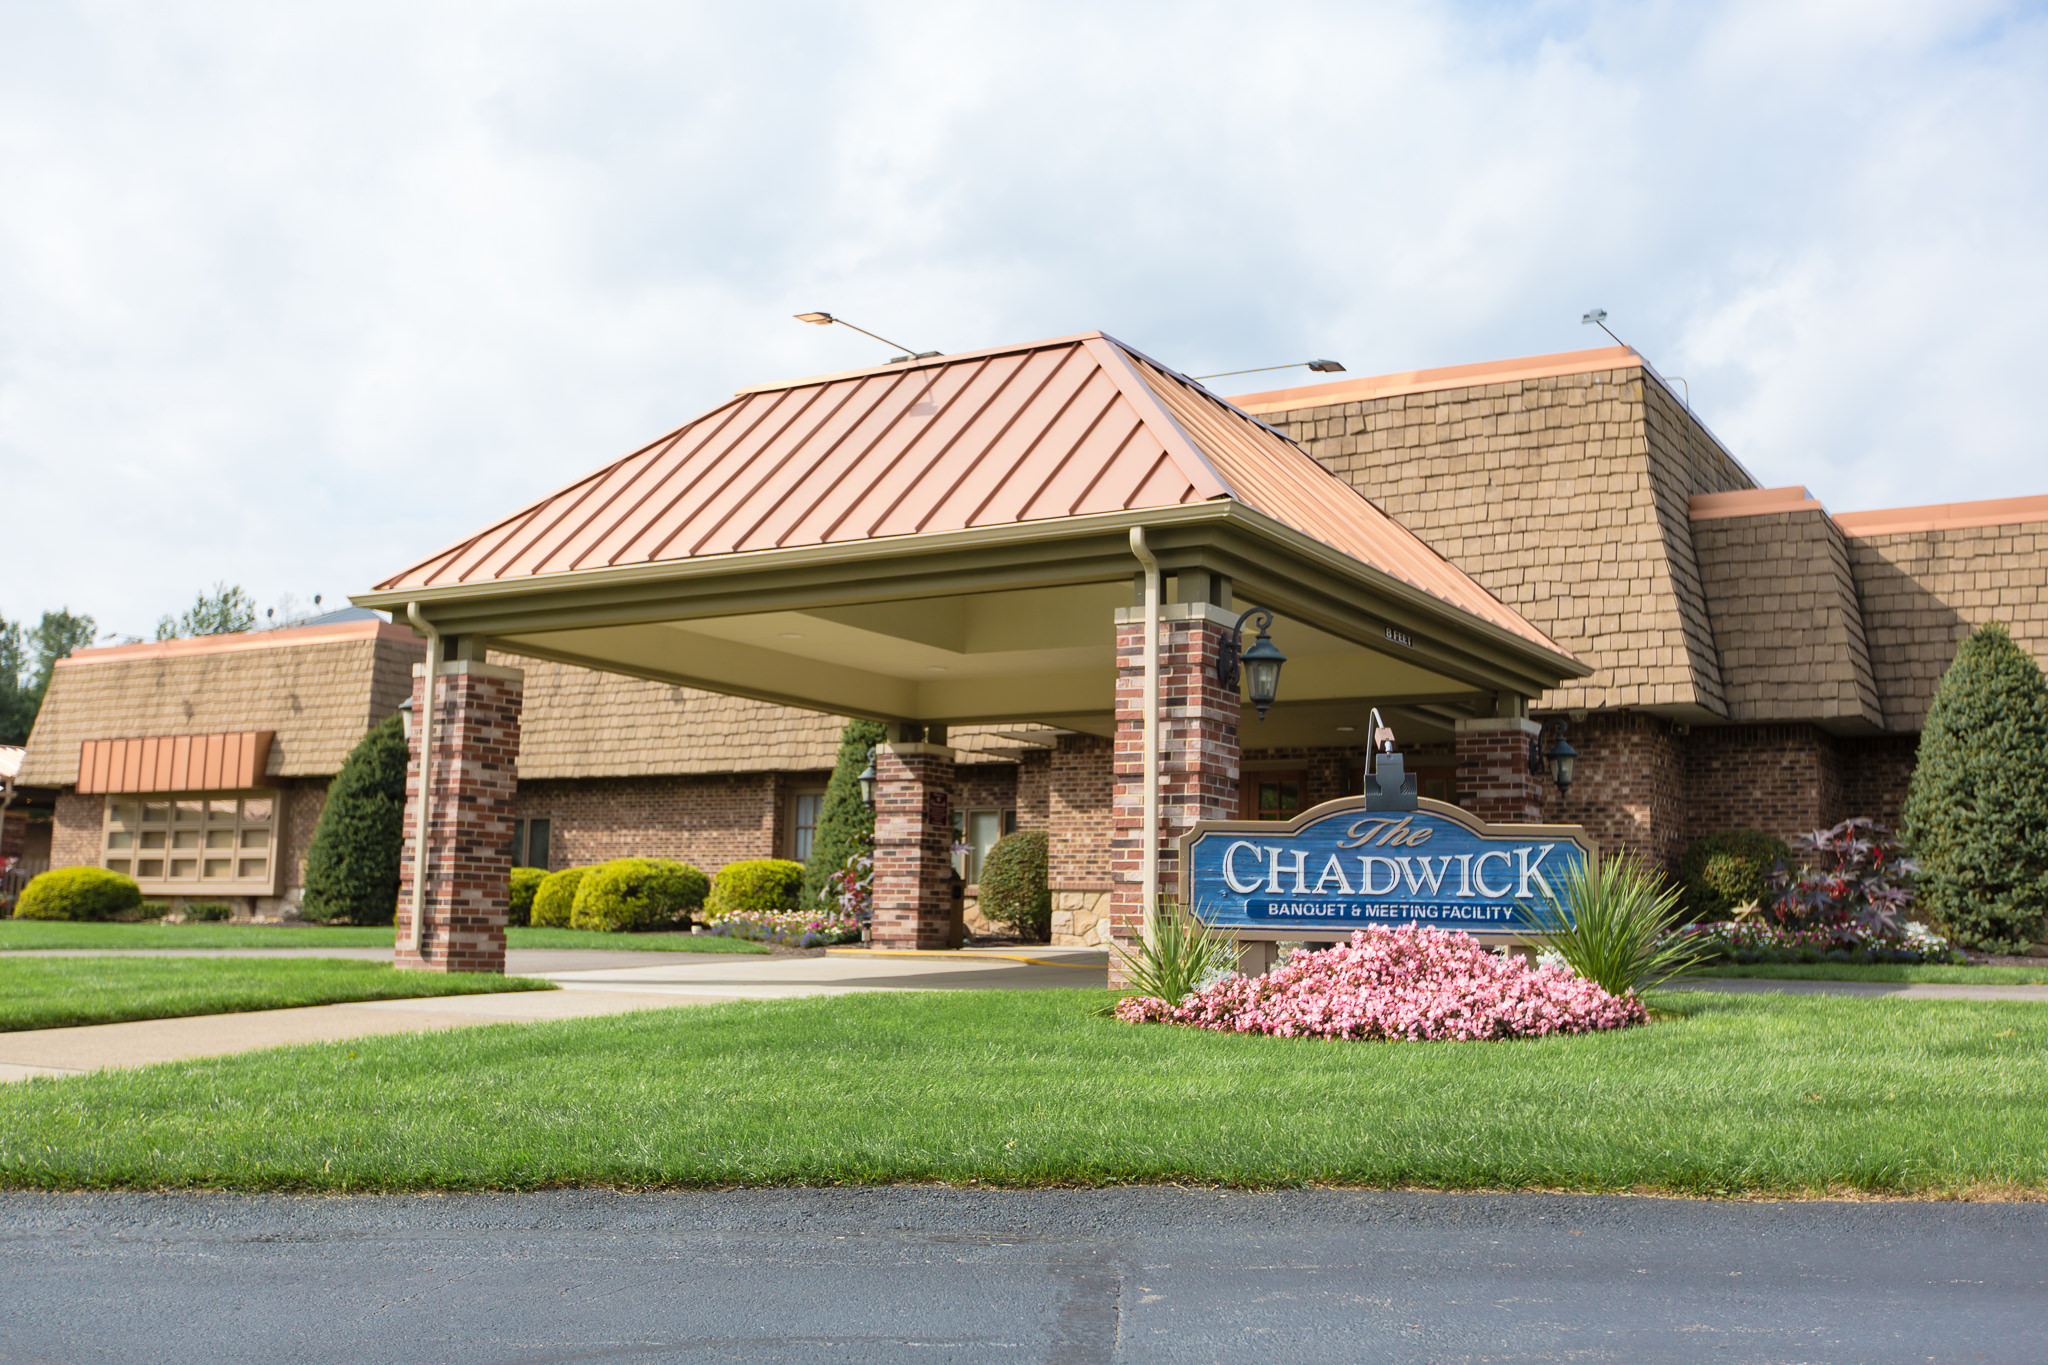 The Chadwick banquet & meeting facility in Wexford, PA